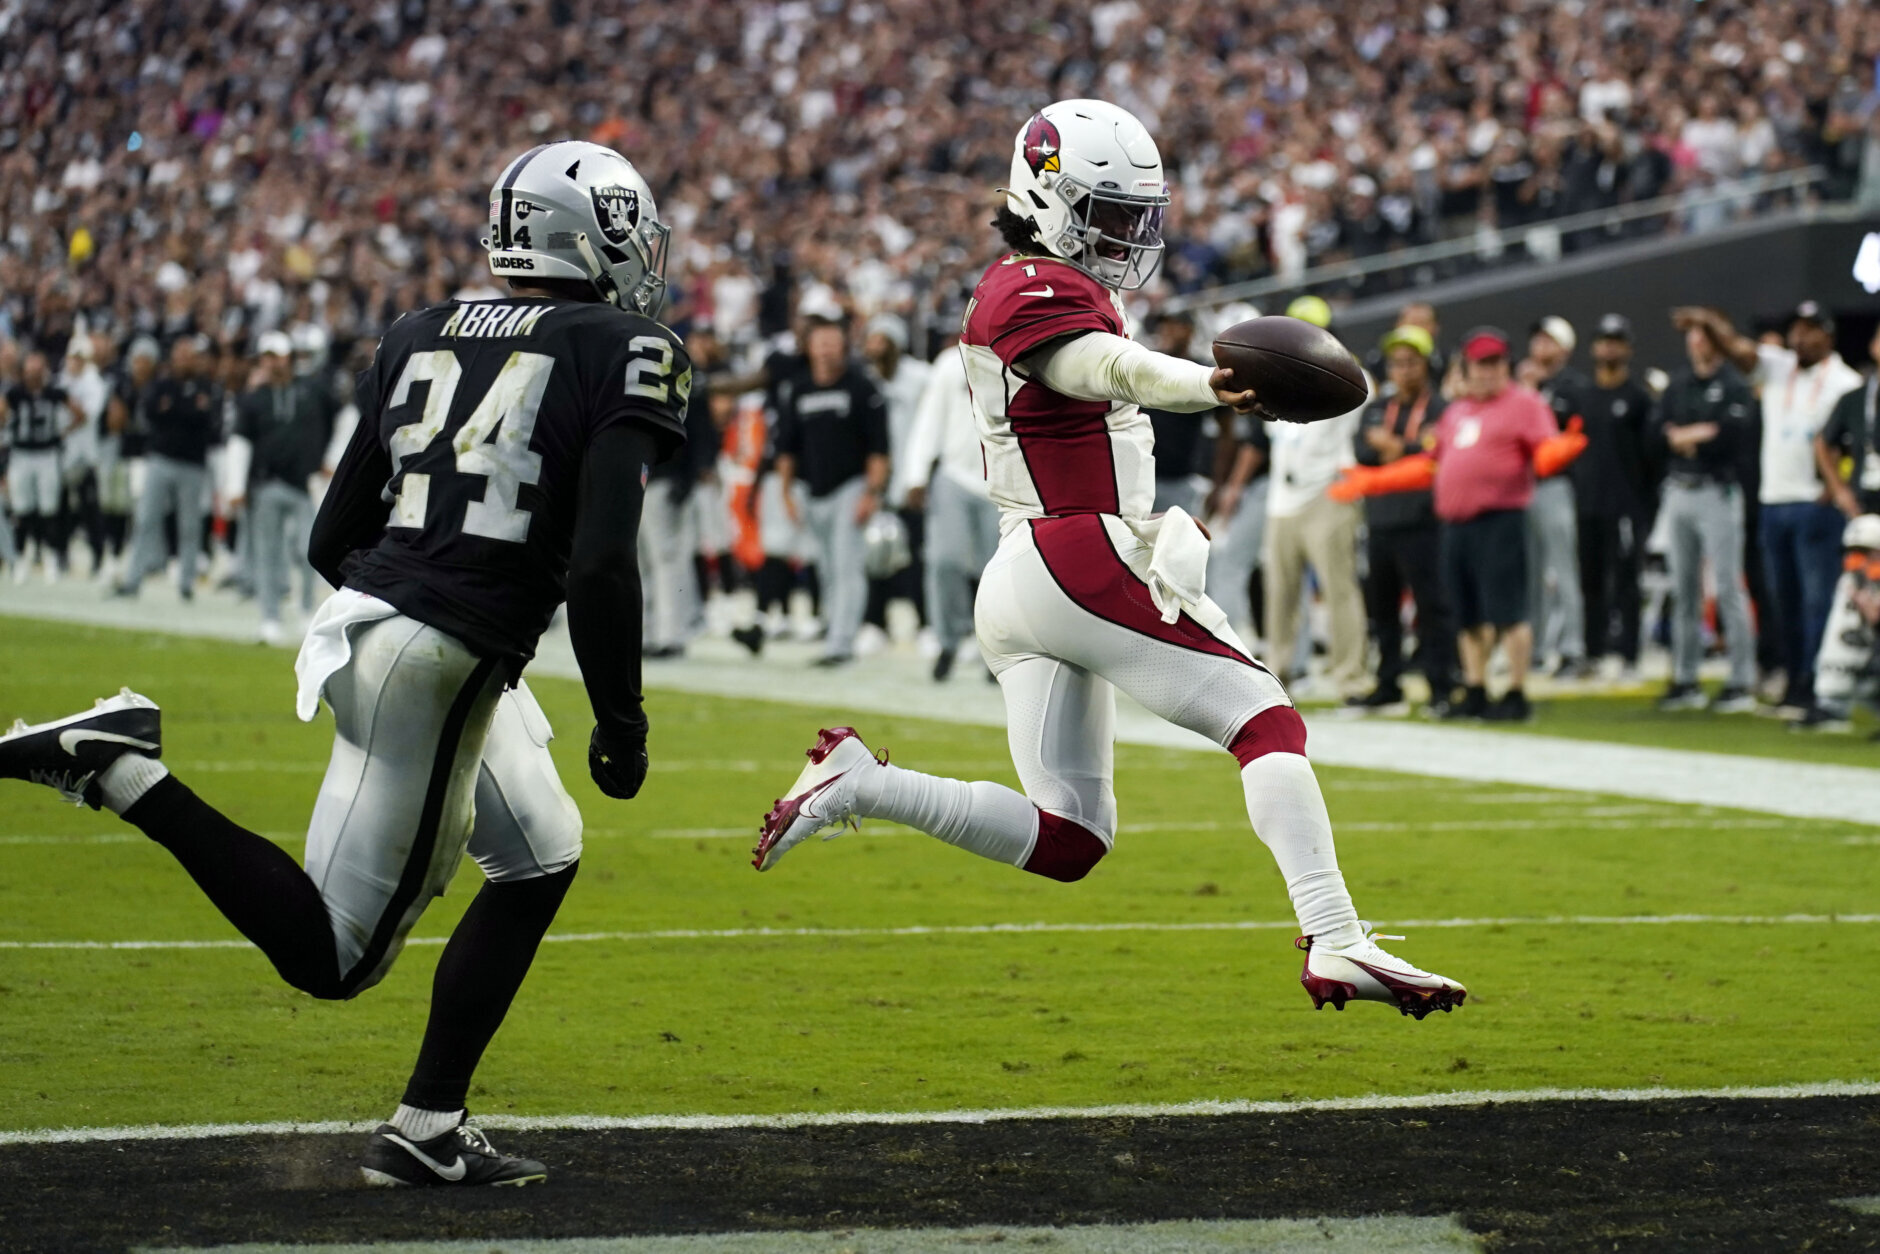 <p><b><i>Cardinals 29</i></b><br />
<b><i>Raiders 23 (OT)</i></b></p>
<p><a href="https://profootballtalk.nbcsports.com/2022/09/16/kliff-kingsbury-practice-was-much-more-focused-and-intentional-this-week/" target="_blank" rel="noopener" data-saferedirecturl="https://www.google.com/url?q=https://profootballtalk.nbcsports.com/2022/09/16/kliff-kingsbury-practice-was-much-more-focused-and-intentional-this-week/&amp;source=gmail&amp;ust=1663641855997000&amp;usg=AOvVaw1J2aJg9Fe4iJzaNi1uHG12">A team more focused and intentional</a> doesn&#8217;t fall behind by 20 in the first half. But give Arizona credit for joining Miami to become the first tandem of teams to erase 20-point fourth-quarter deficits on the same day thanks to Kyler Murray running a mile on one play.</p>
<blockquote class="twitter-tweet tw-align-center">
<p dir="ltr" lang="en">According to NFL Next Gen Stats, Kyler Murray ran a total distance of 85.69 yards on this successful 2-point conversion rush. <a href="https://t.co/rkzCWxBaUg">https://t.co/rkzCWxBaUg</a></p>
<p>— ESPN Stats &amp; Info (@ESPNStatsInfo) <a href="https://twitter.com/ESPNStatsInfo/status/1571685417497526272?ref_src=twsrc%5Etfw">September 19, 2022</a></p></blockquote>
<p><script async src="https://platform.twitter.com/widgets.js" charset="utf-8"></script></p>
